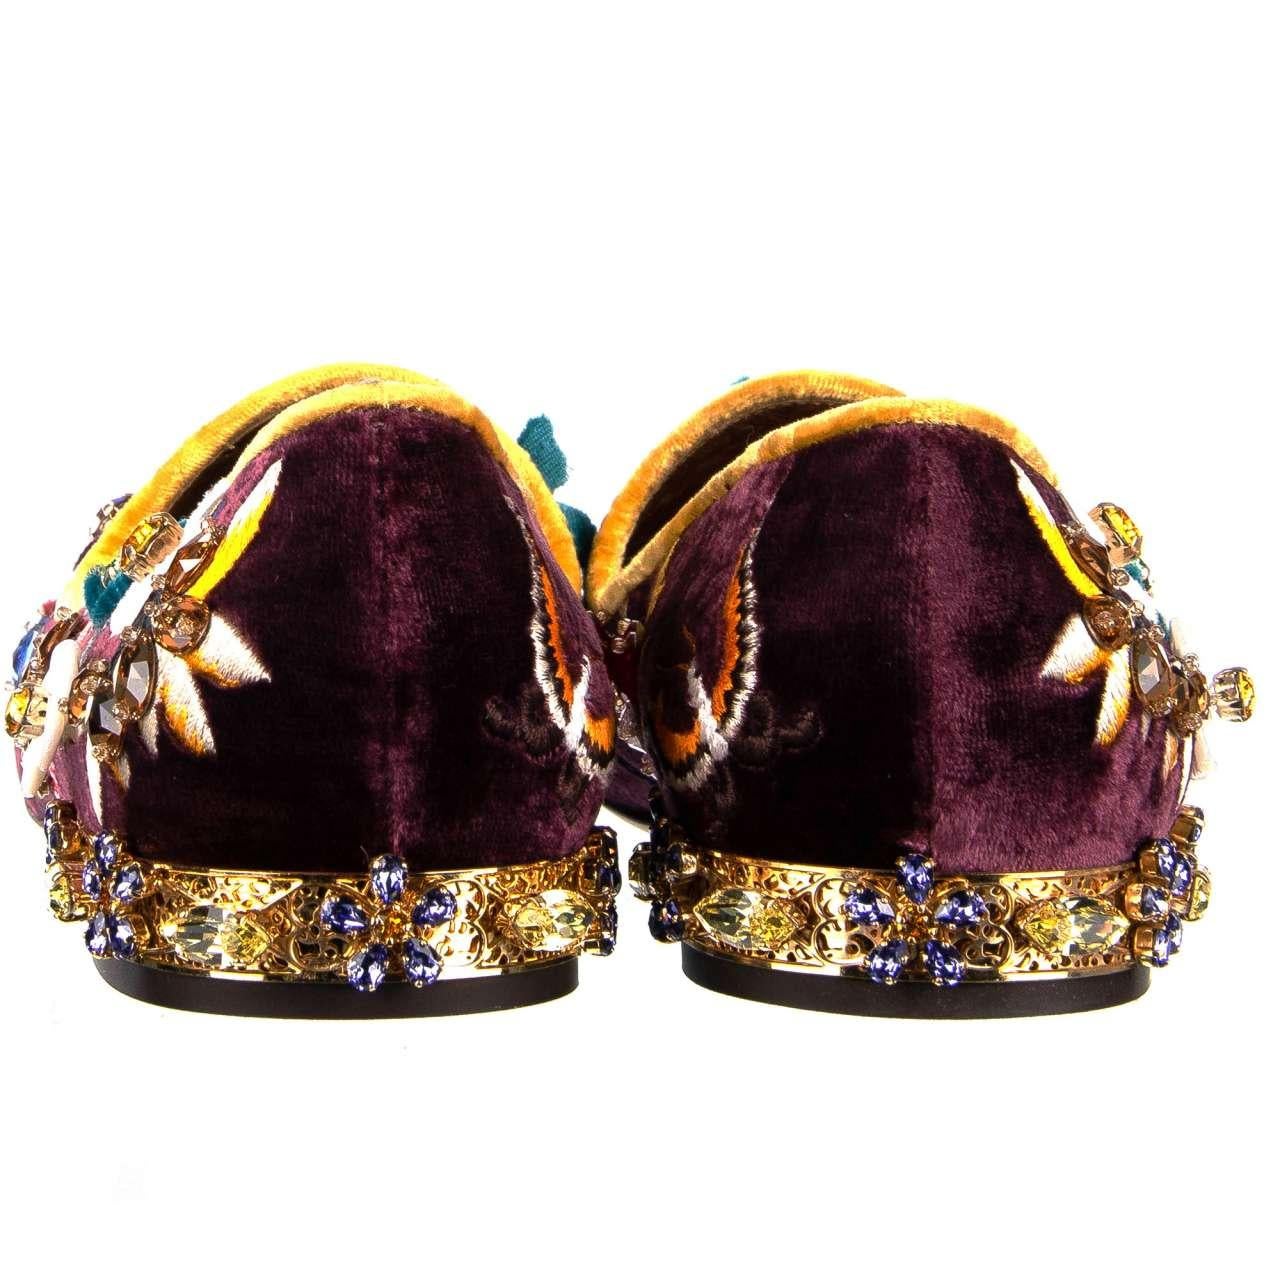 - Baroque Velvet Loafers JASMINE with gold metal embellishments, floral embroidery and crystals by DOLCE & GABBANA Black Label - MADE IN ITALY - New with Gift Box - Former RRP: EUR 5.450 - Model: CP0045-AD021-8M073 - Material: Velvet, 82% Viscose,